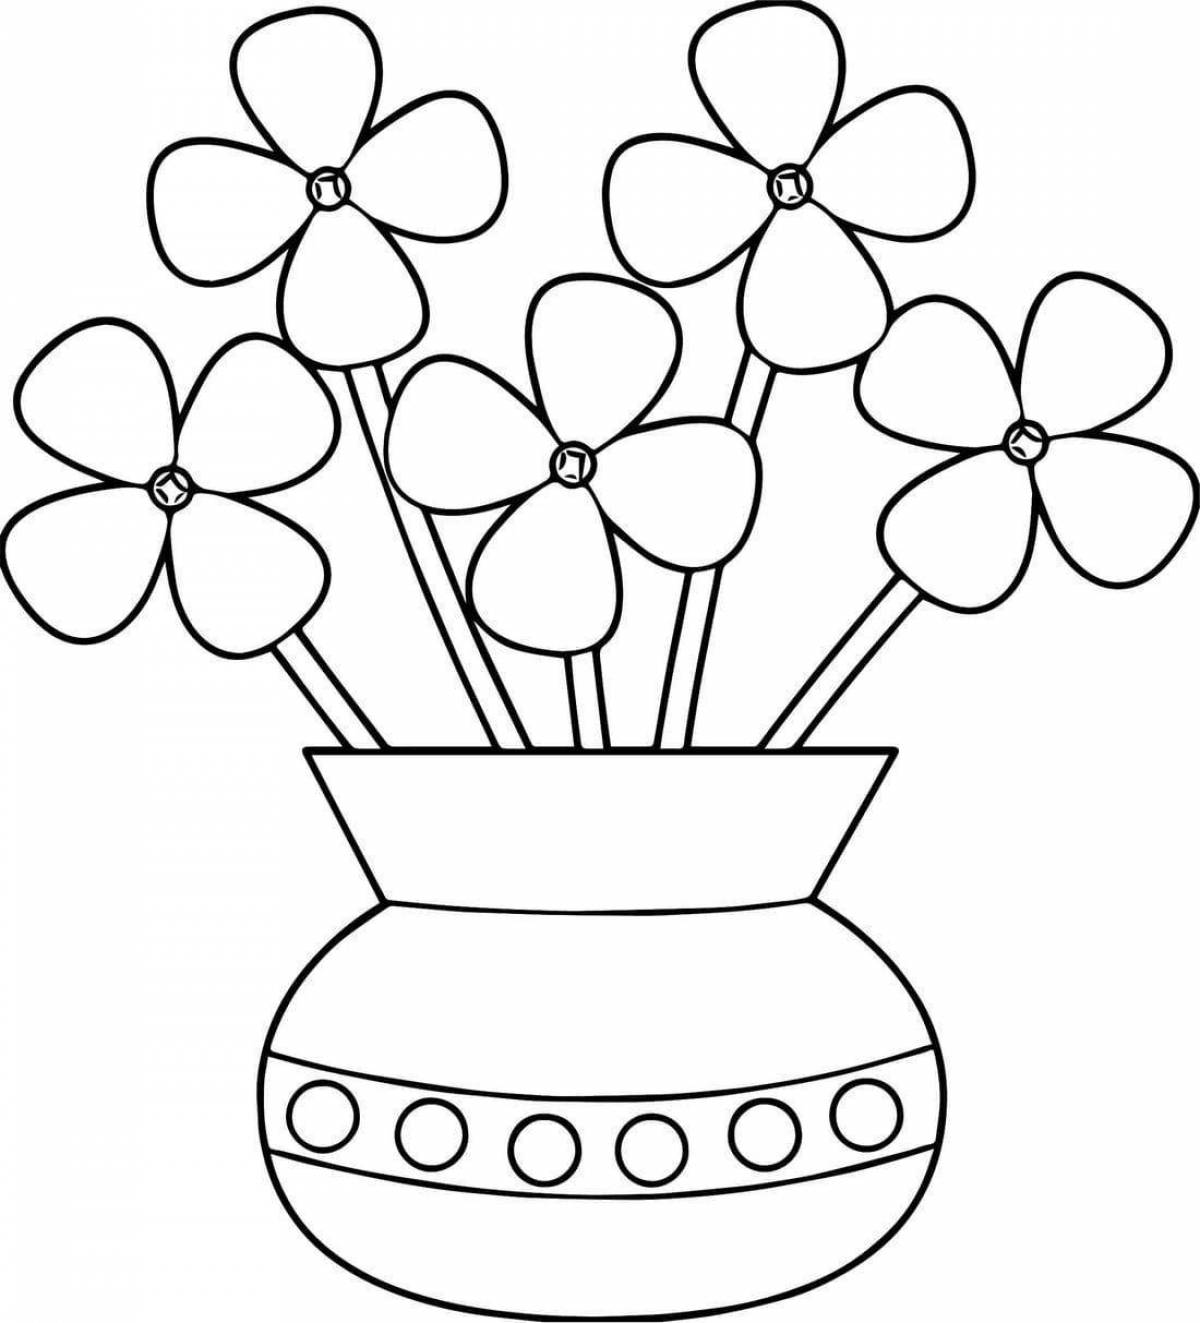 Complex coloring flower in a vase